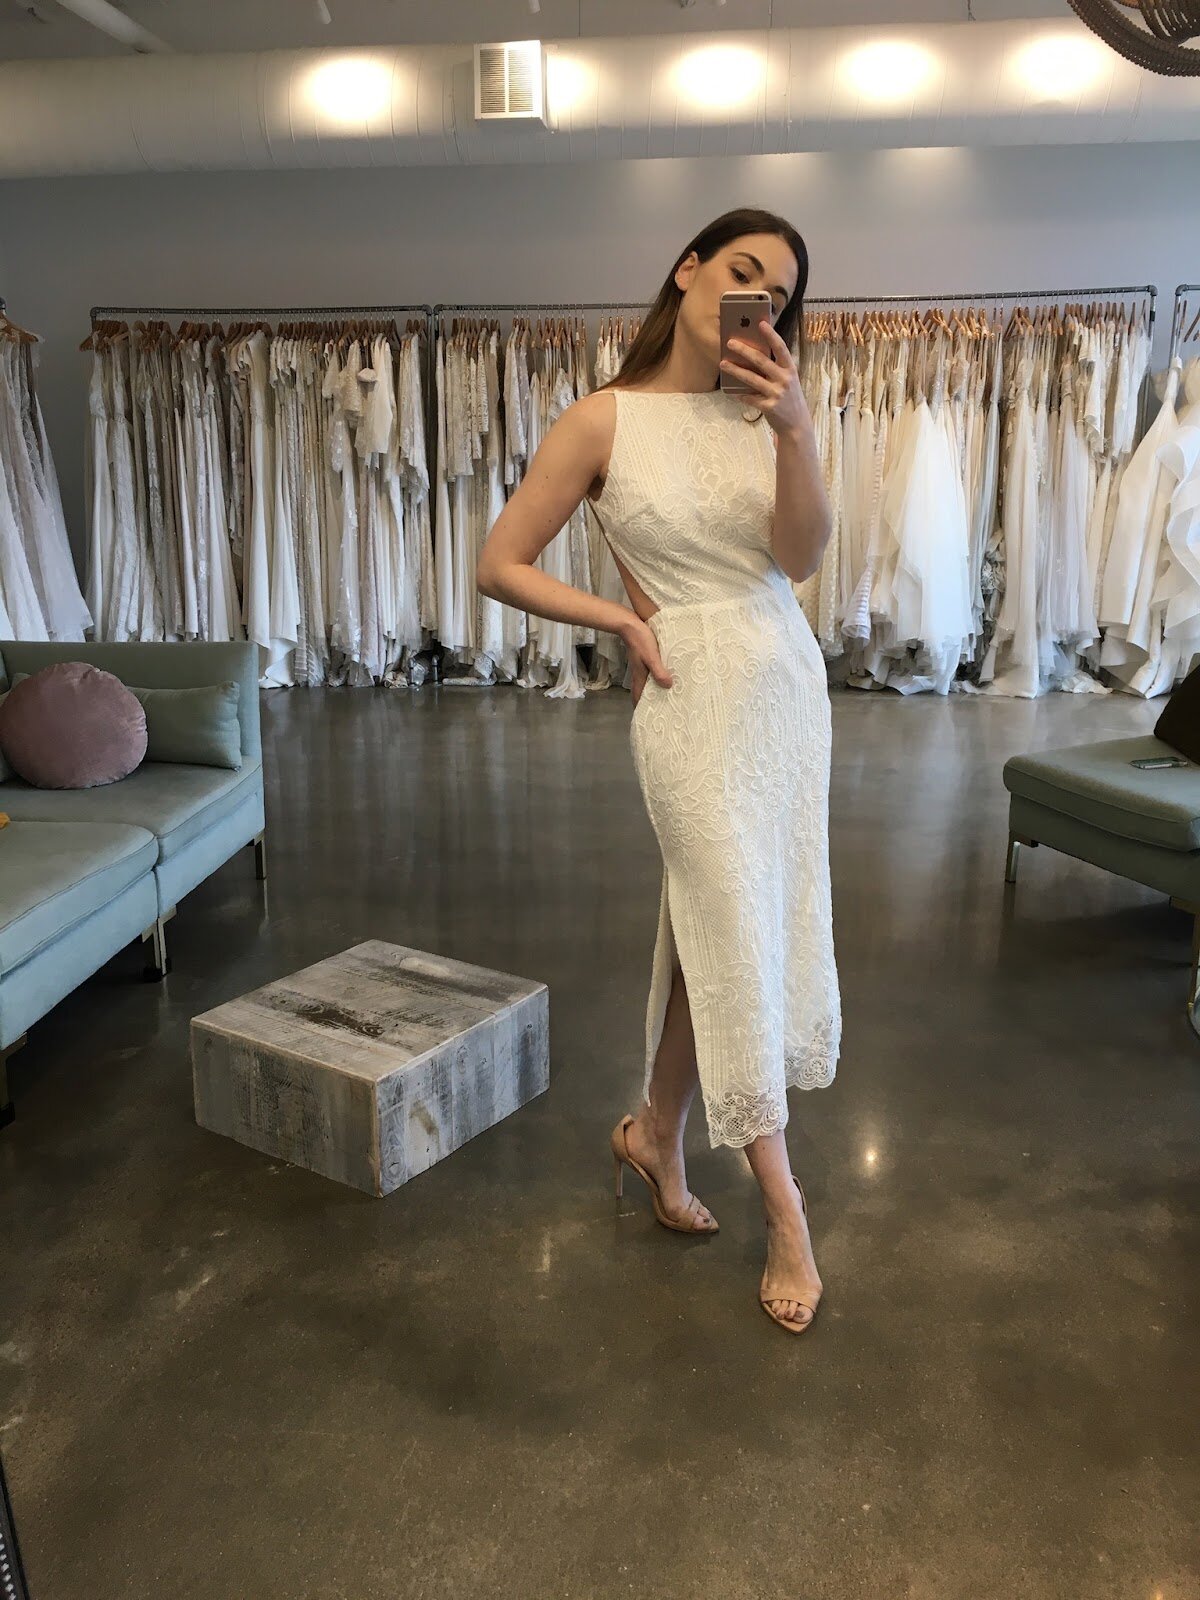 This is the Ready to Wear Lace Dress by Sarah Seven. Were so excited to feature separates, short dresses, and even trousers on our online store! This lace gown is one of my favorites from Sarah Sevens Before collection. It is a size 2 and is $30